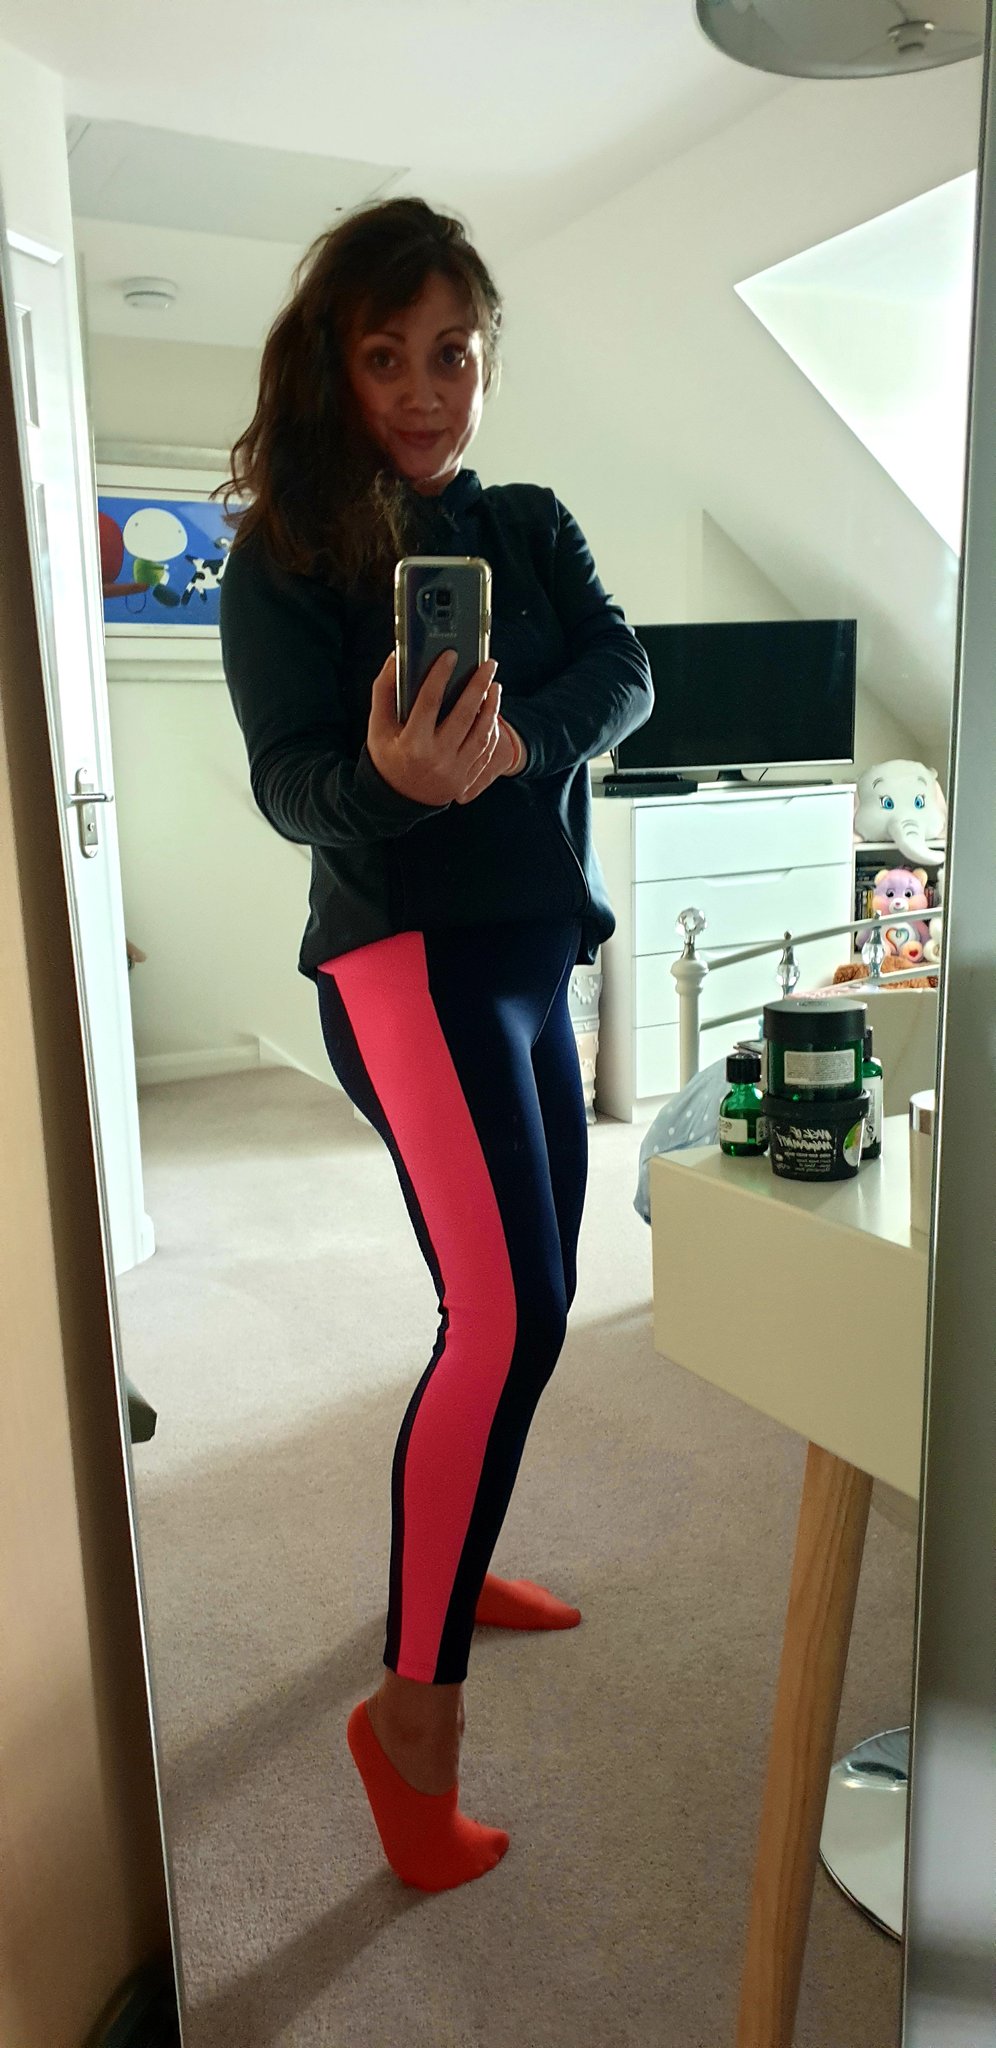 Meeeeee on X: 51 year old woman, who lost 3 stone, dropped 2 dress sizes &  feels great in new gym leggings. Don't like me posting it! I don't f**king  care! Go